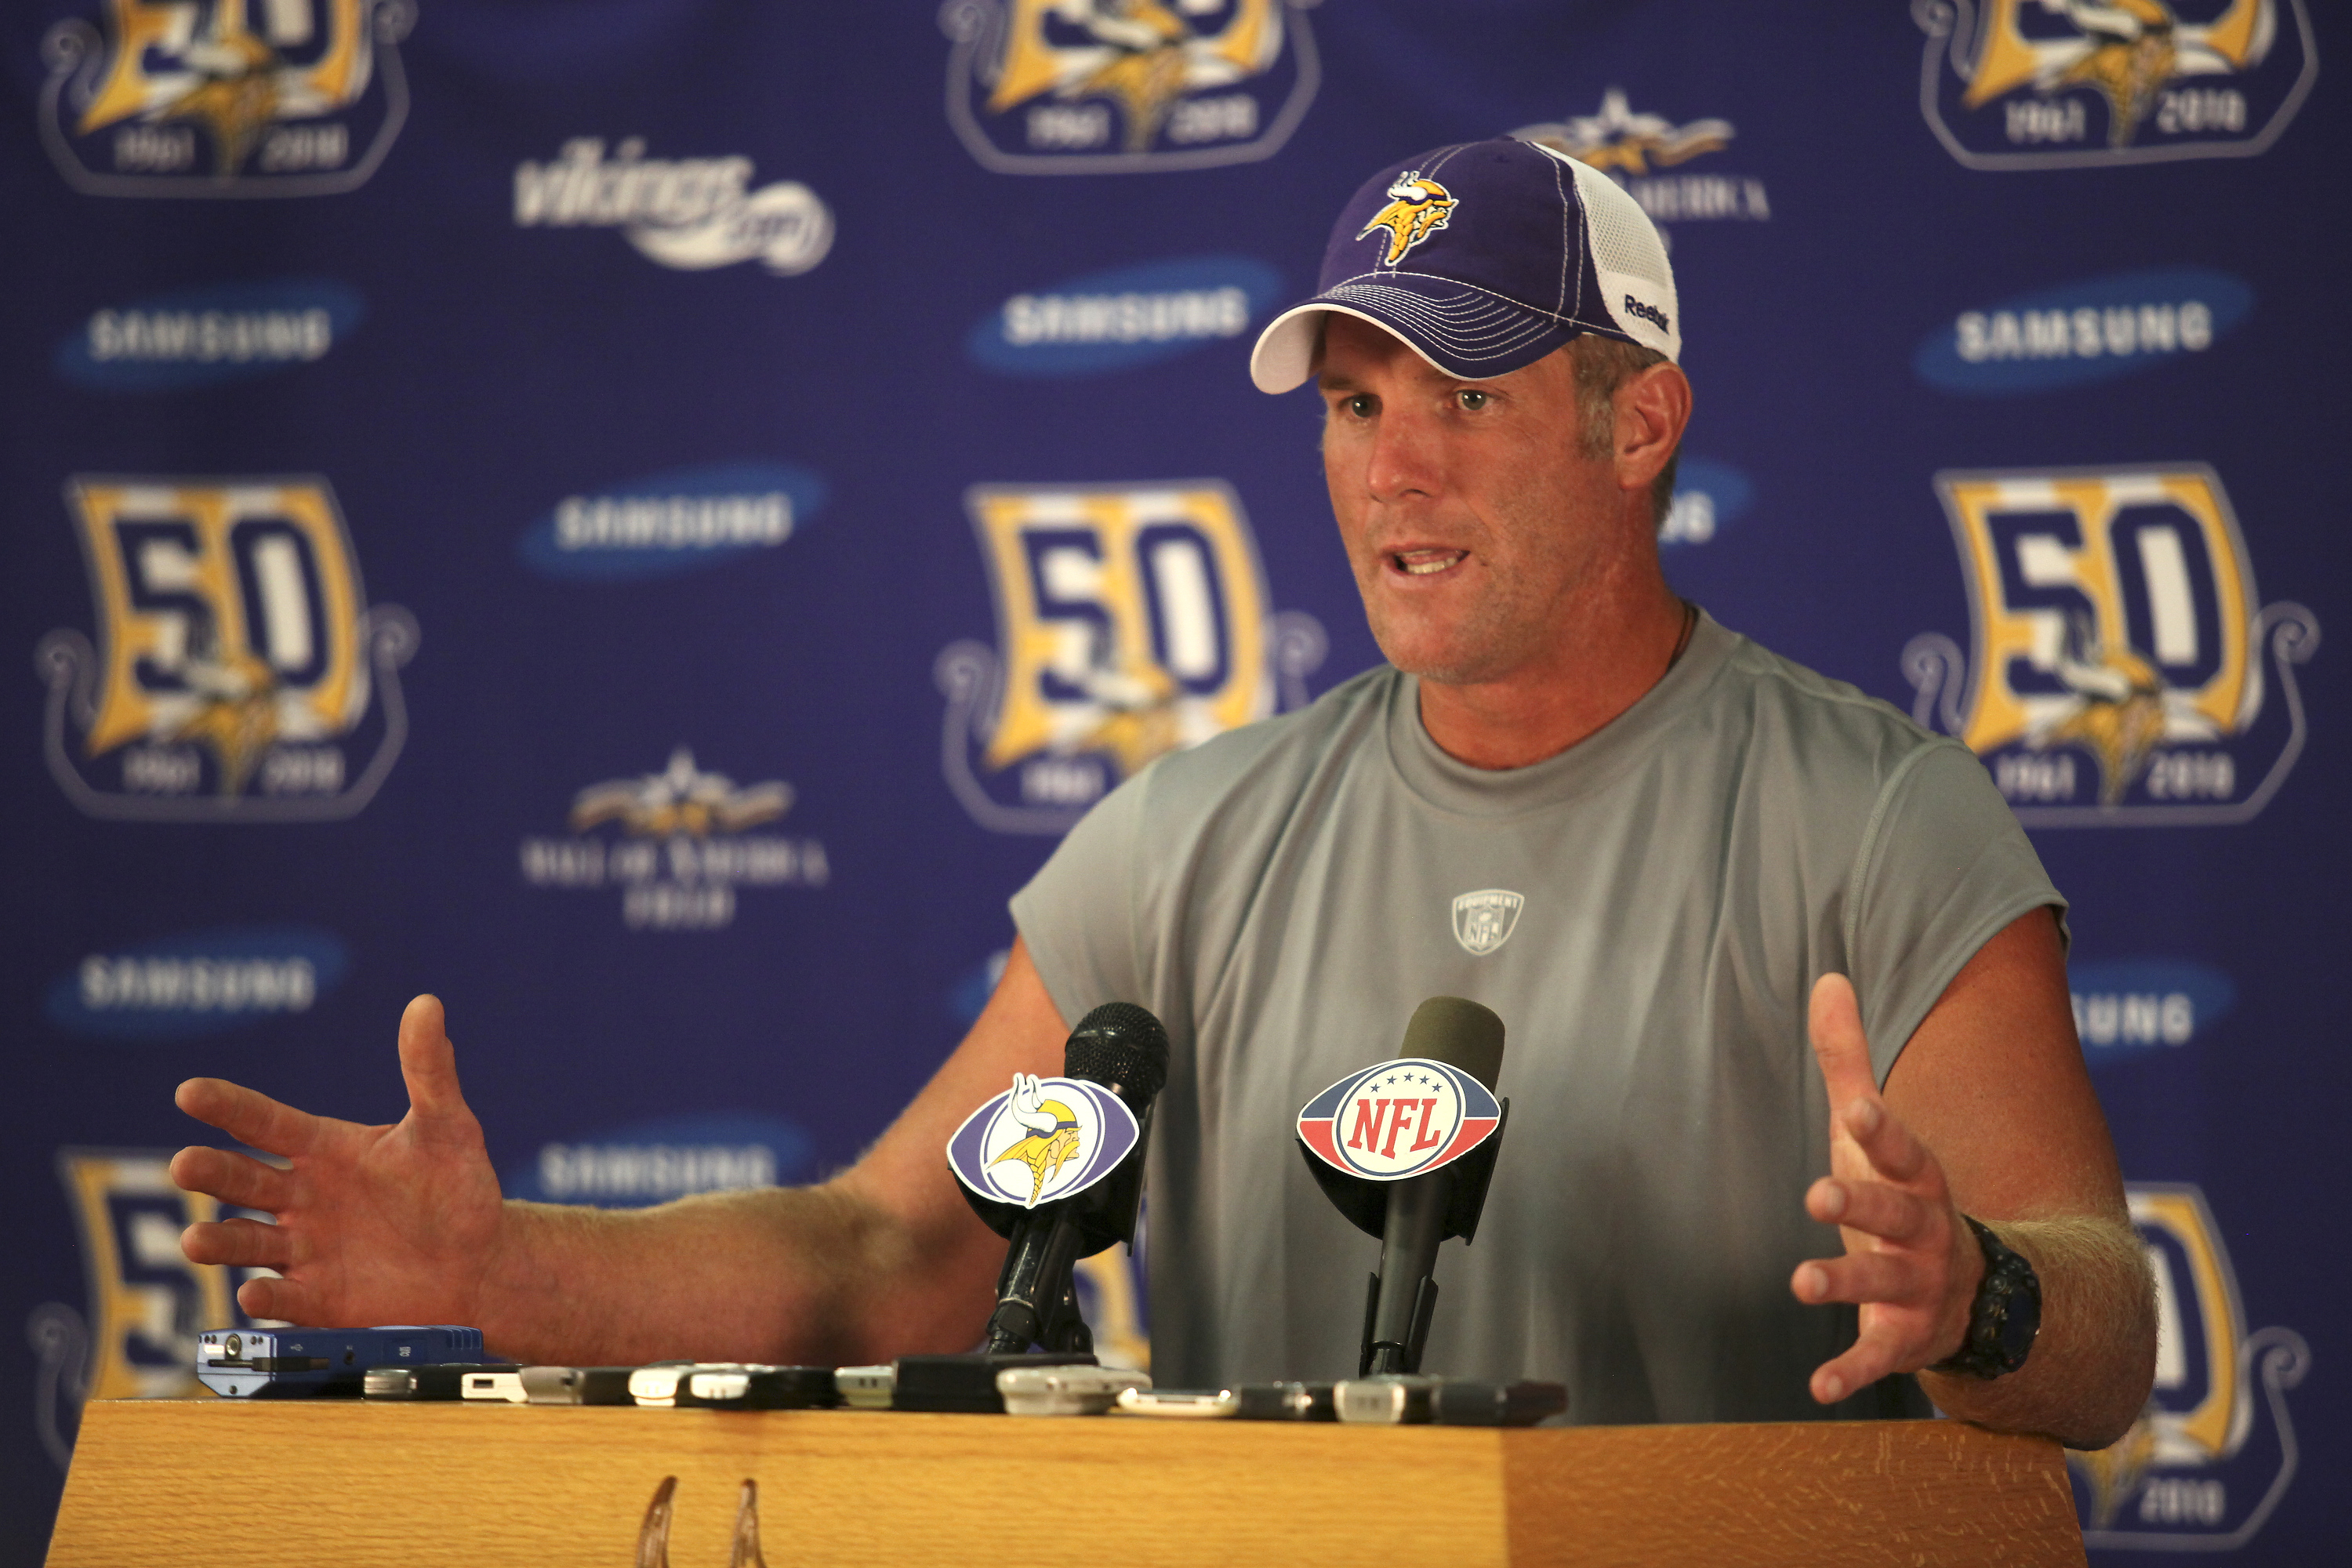 EDEN PRAIRIE, MN - AUGUST 18: Minnesota Vikings quarterback Brett Favre addresses the media at a press conference after the first morning practice since returning to Vikings Winter Park on August 18, 2010 in Eden Prairie, Minnesota. Favre injured his ankl